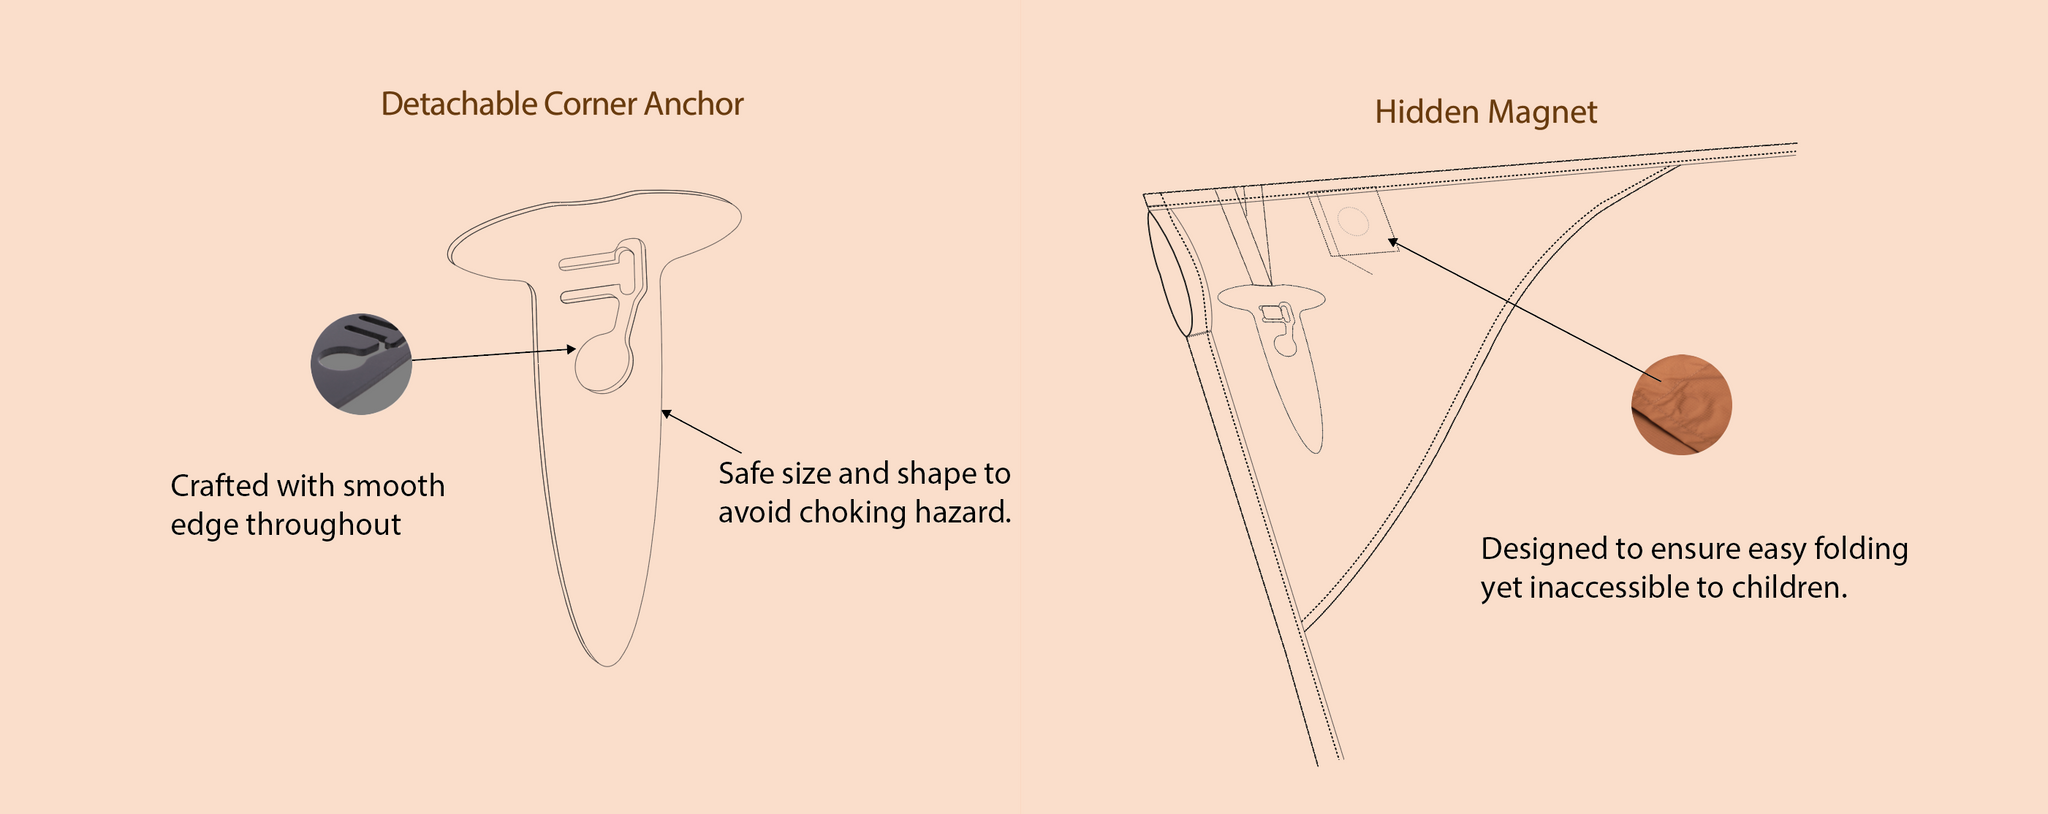 Detachable Corner Anchor photo and Hidden Magnet Photo display, Highlighting the anchor smooth edge and hidden magnet designed to ensure easy folding yet inaccessible to children.